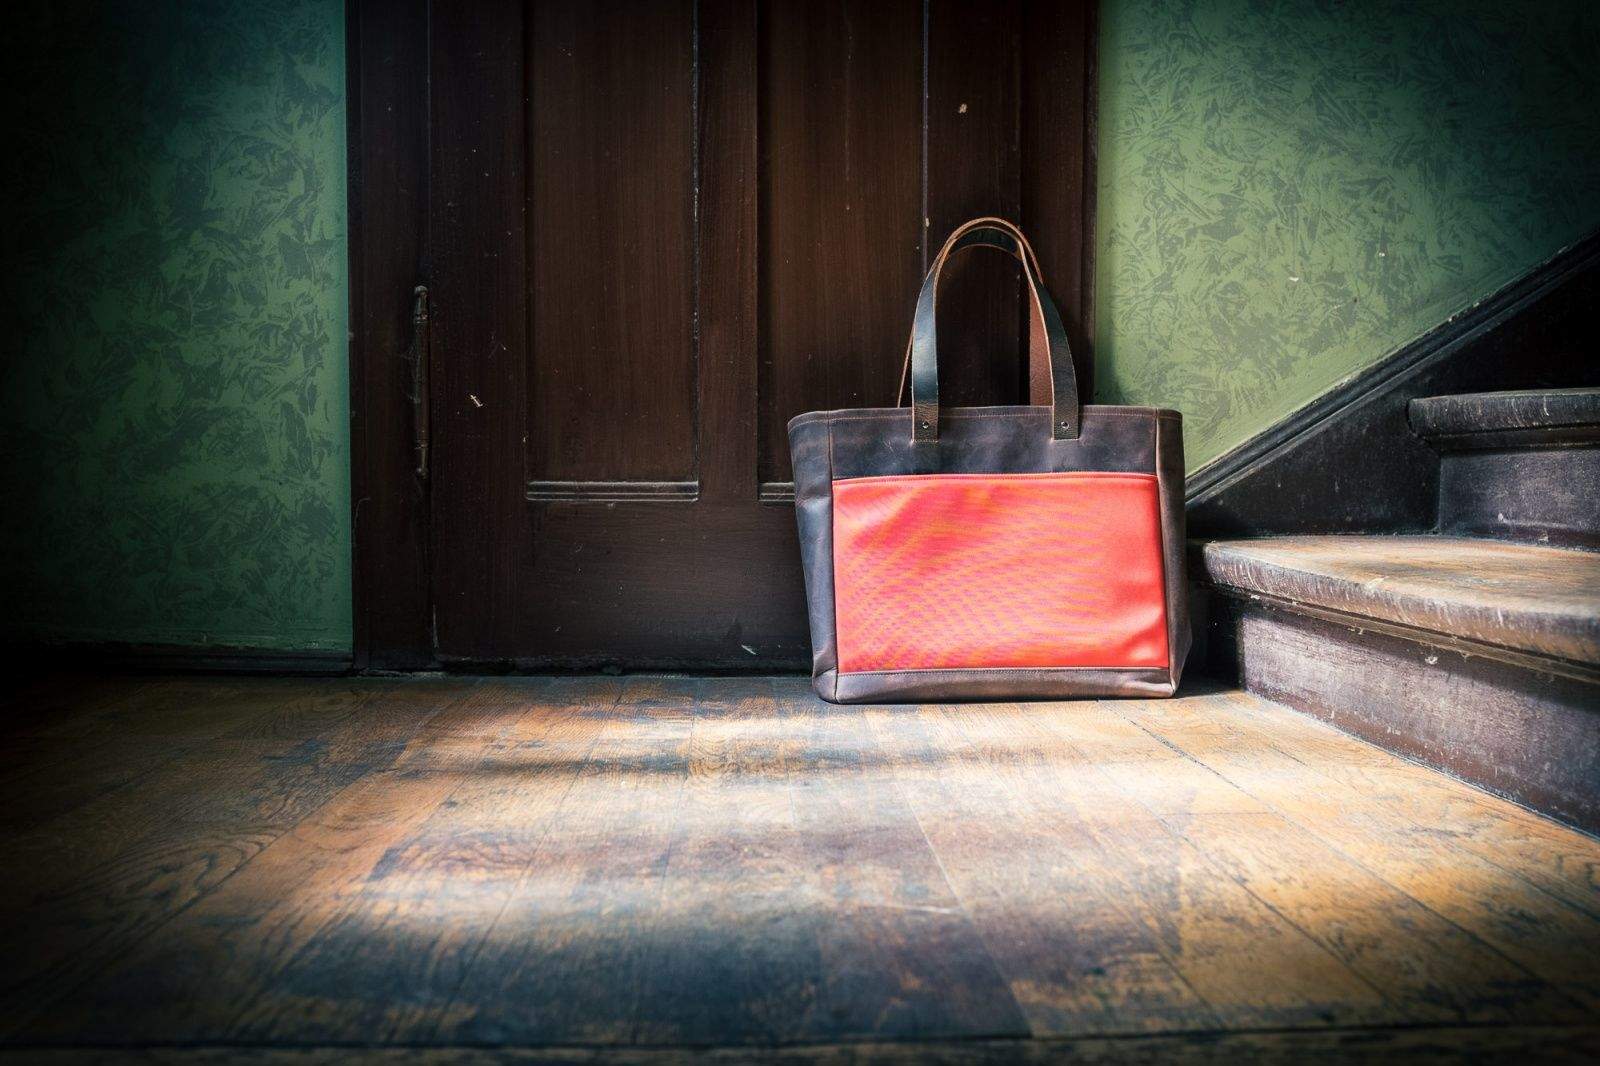 Tote-ally awesome: The Franklin Tote can go anywhere. Photos Charlie Sorrel/Cult of Mac.